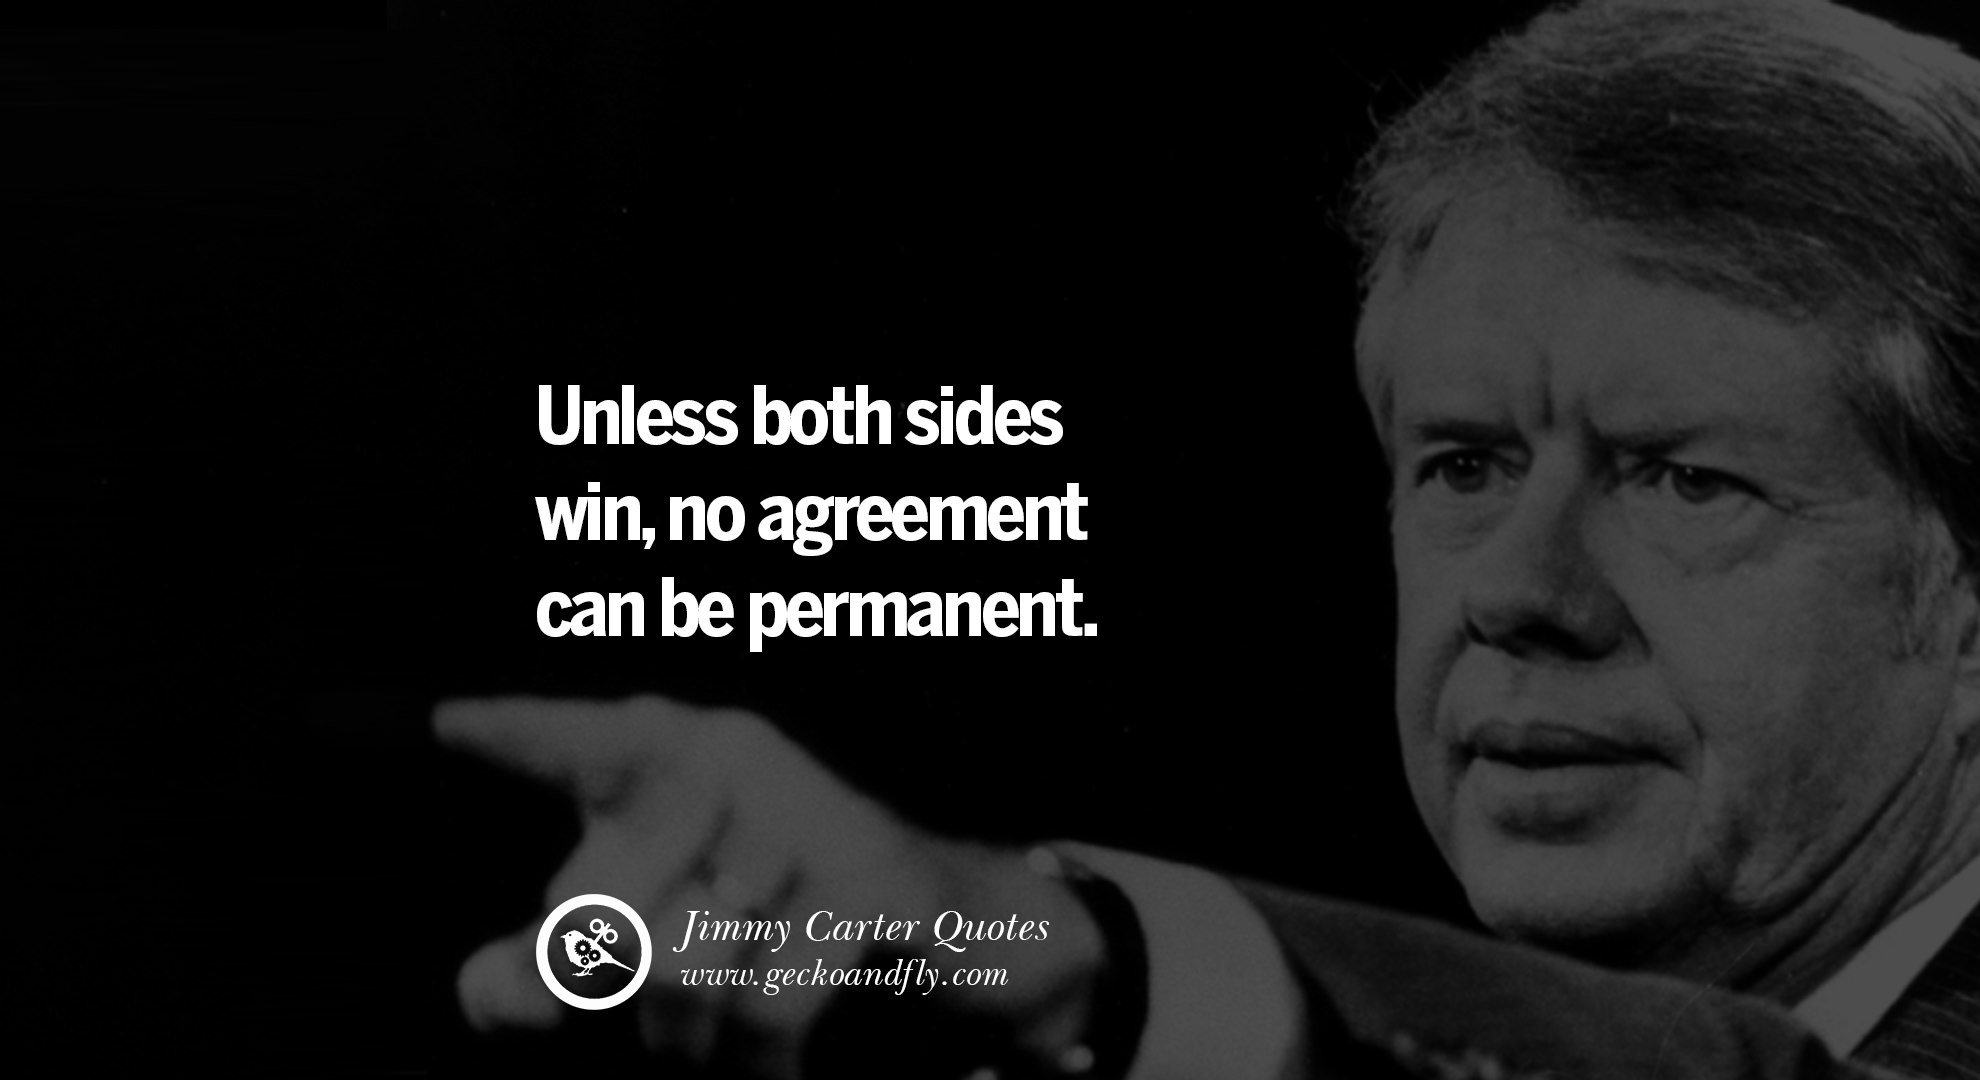 Quotes On Agreement 15 President Jimmy Carter Quotes On Racism Gay Marriage Democracy